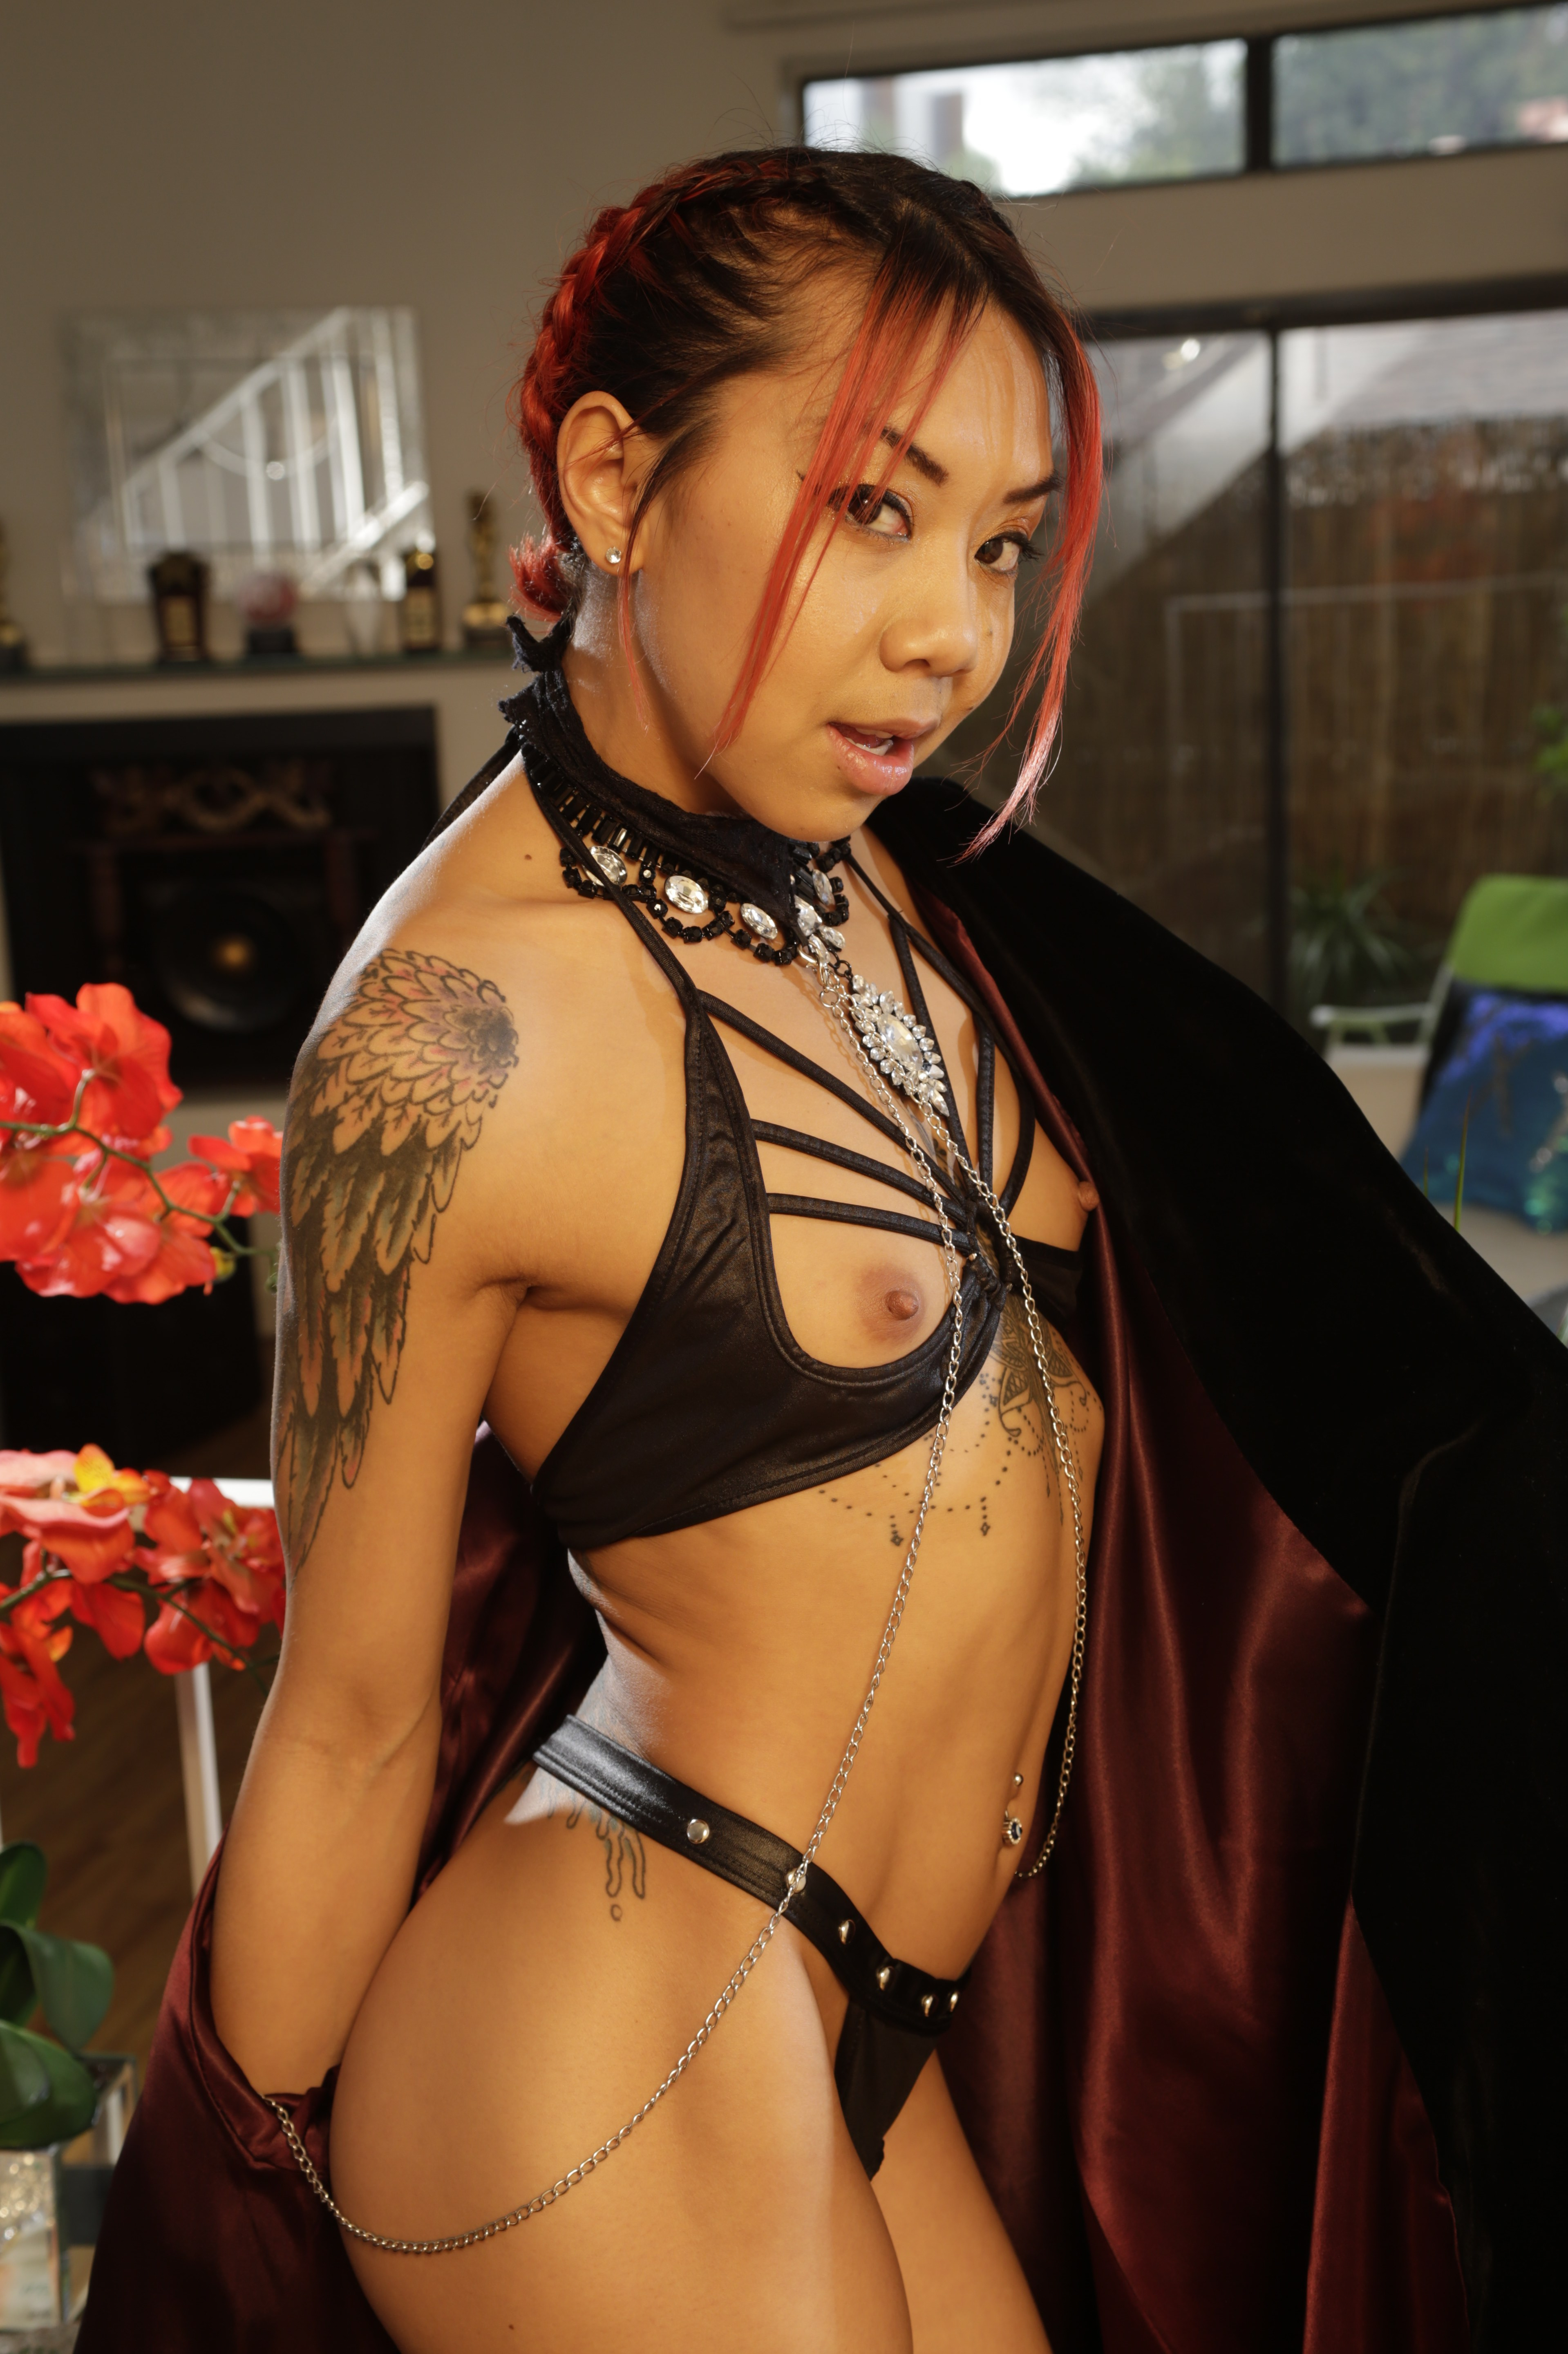 “Kimberly Chi Appearing at Exxxotica Fighting at Caliente Cage Rage April 12th”